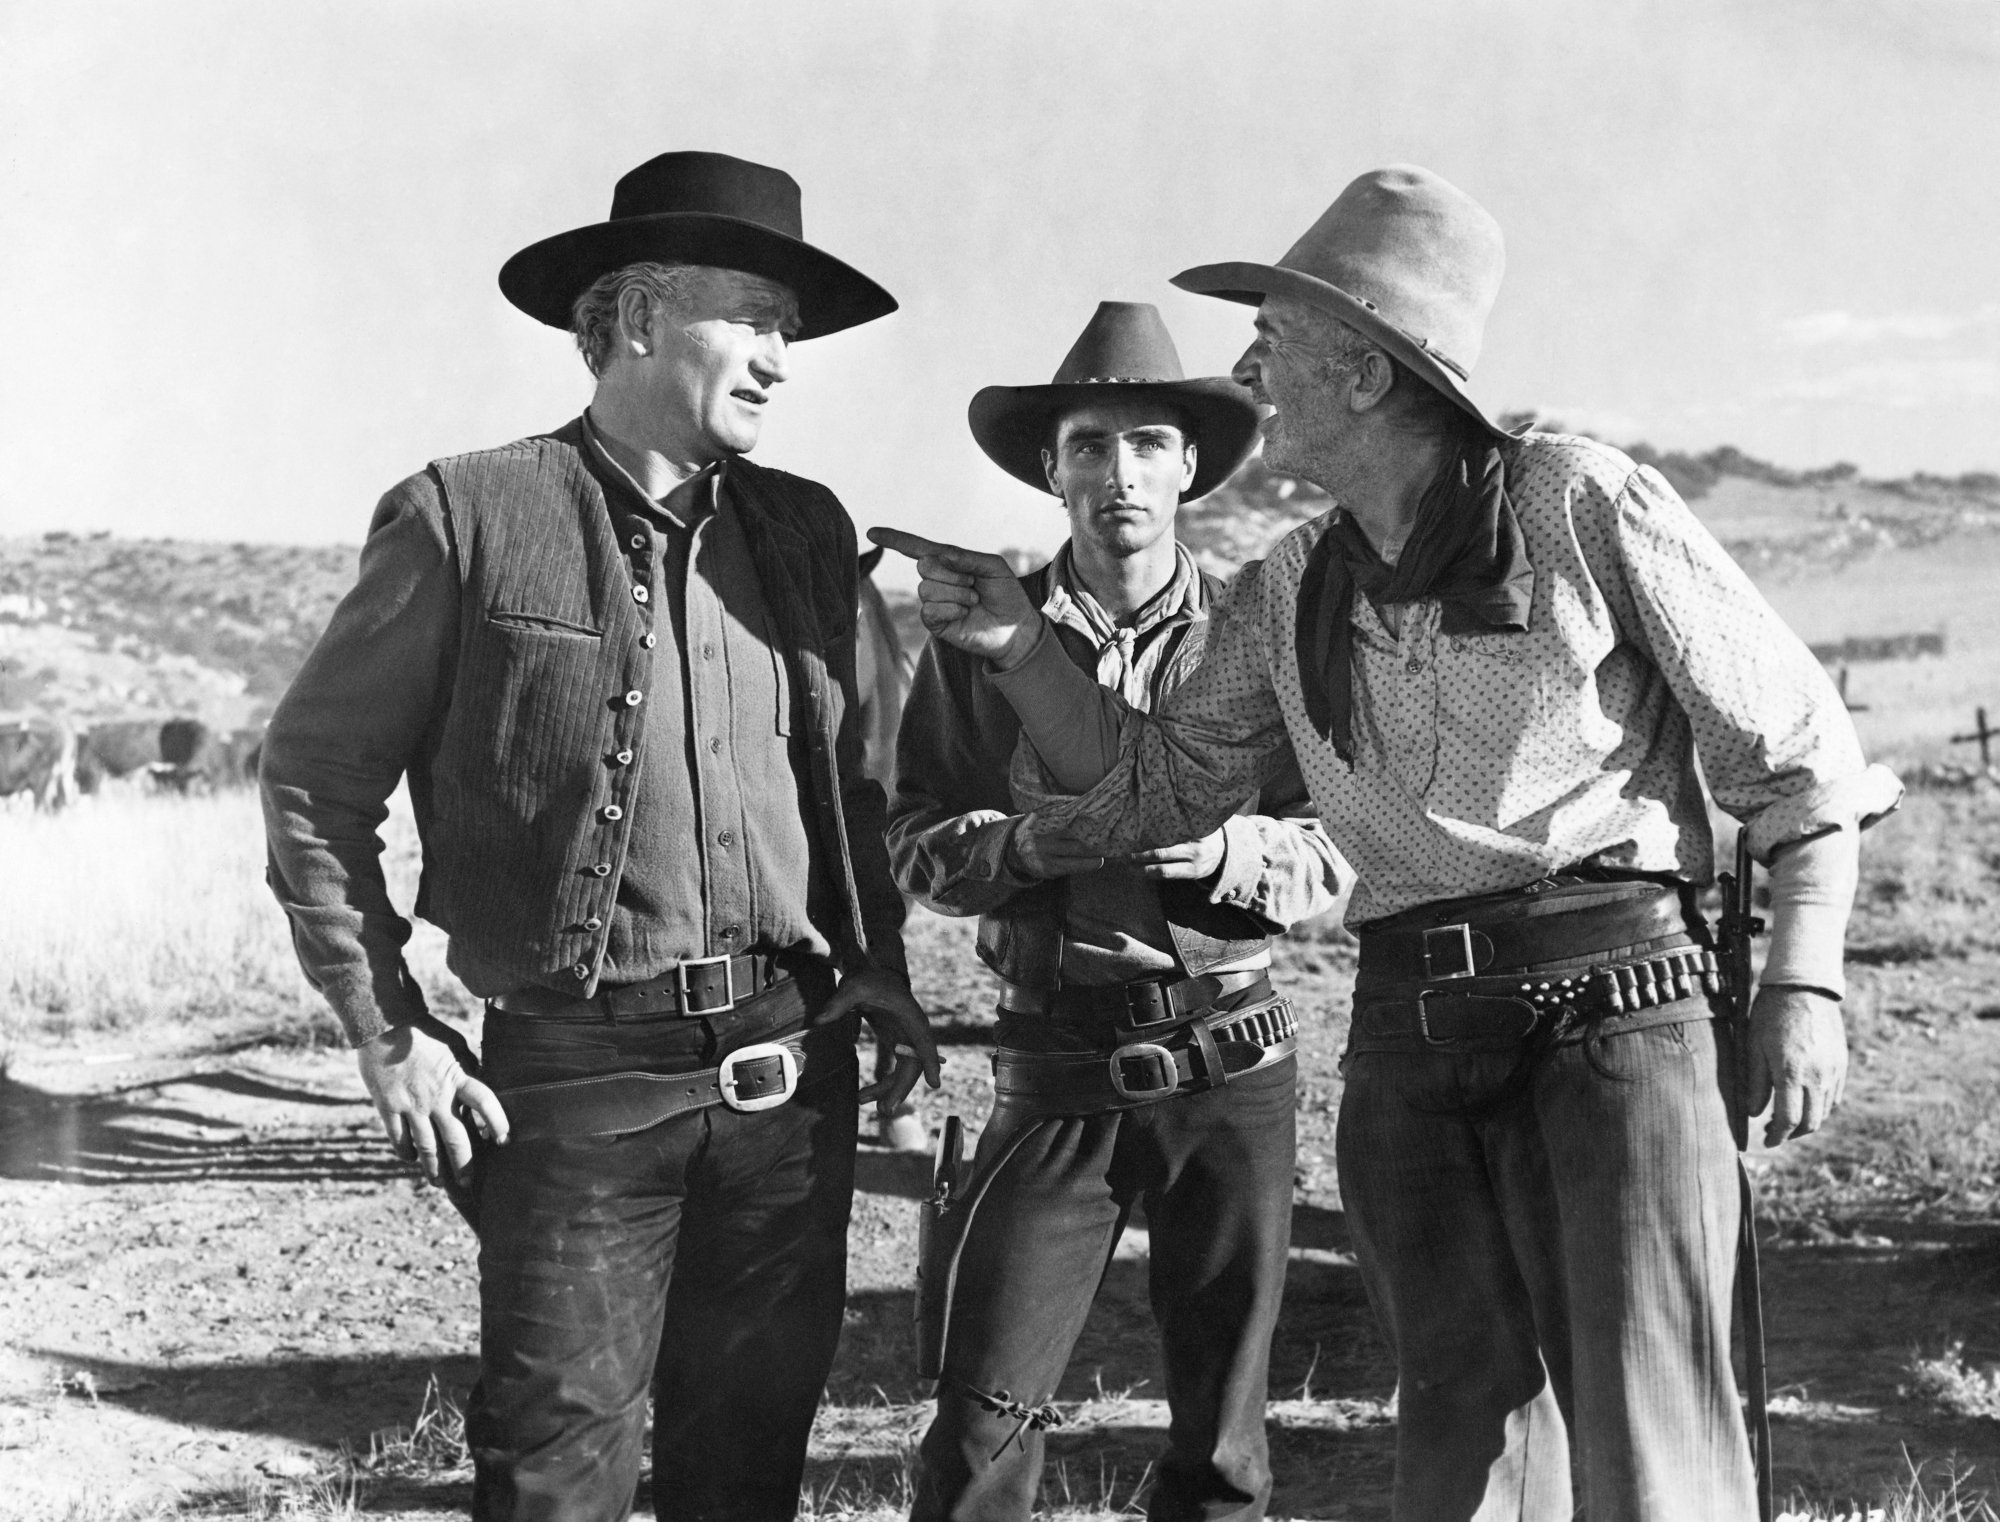 'Red River' John Wayne as Thomas Dunson, Montgomery Clift as Matthew Garth and Walter Brennan as Groot Nadine in a black-and-white picture. Brennan is pointing at Wayne, while Clift is staring at them from behind.